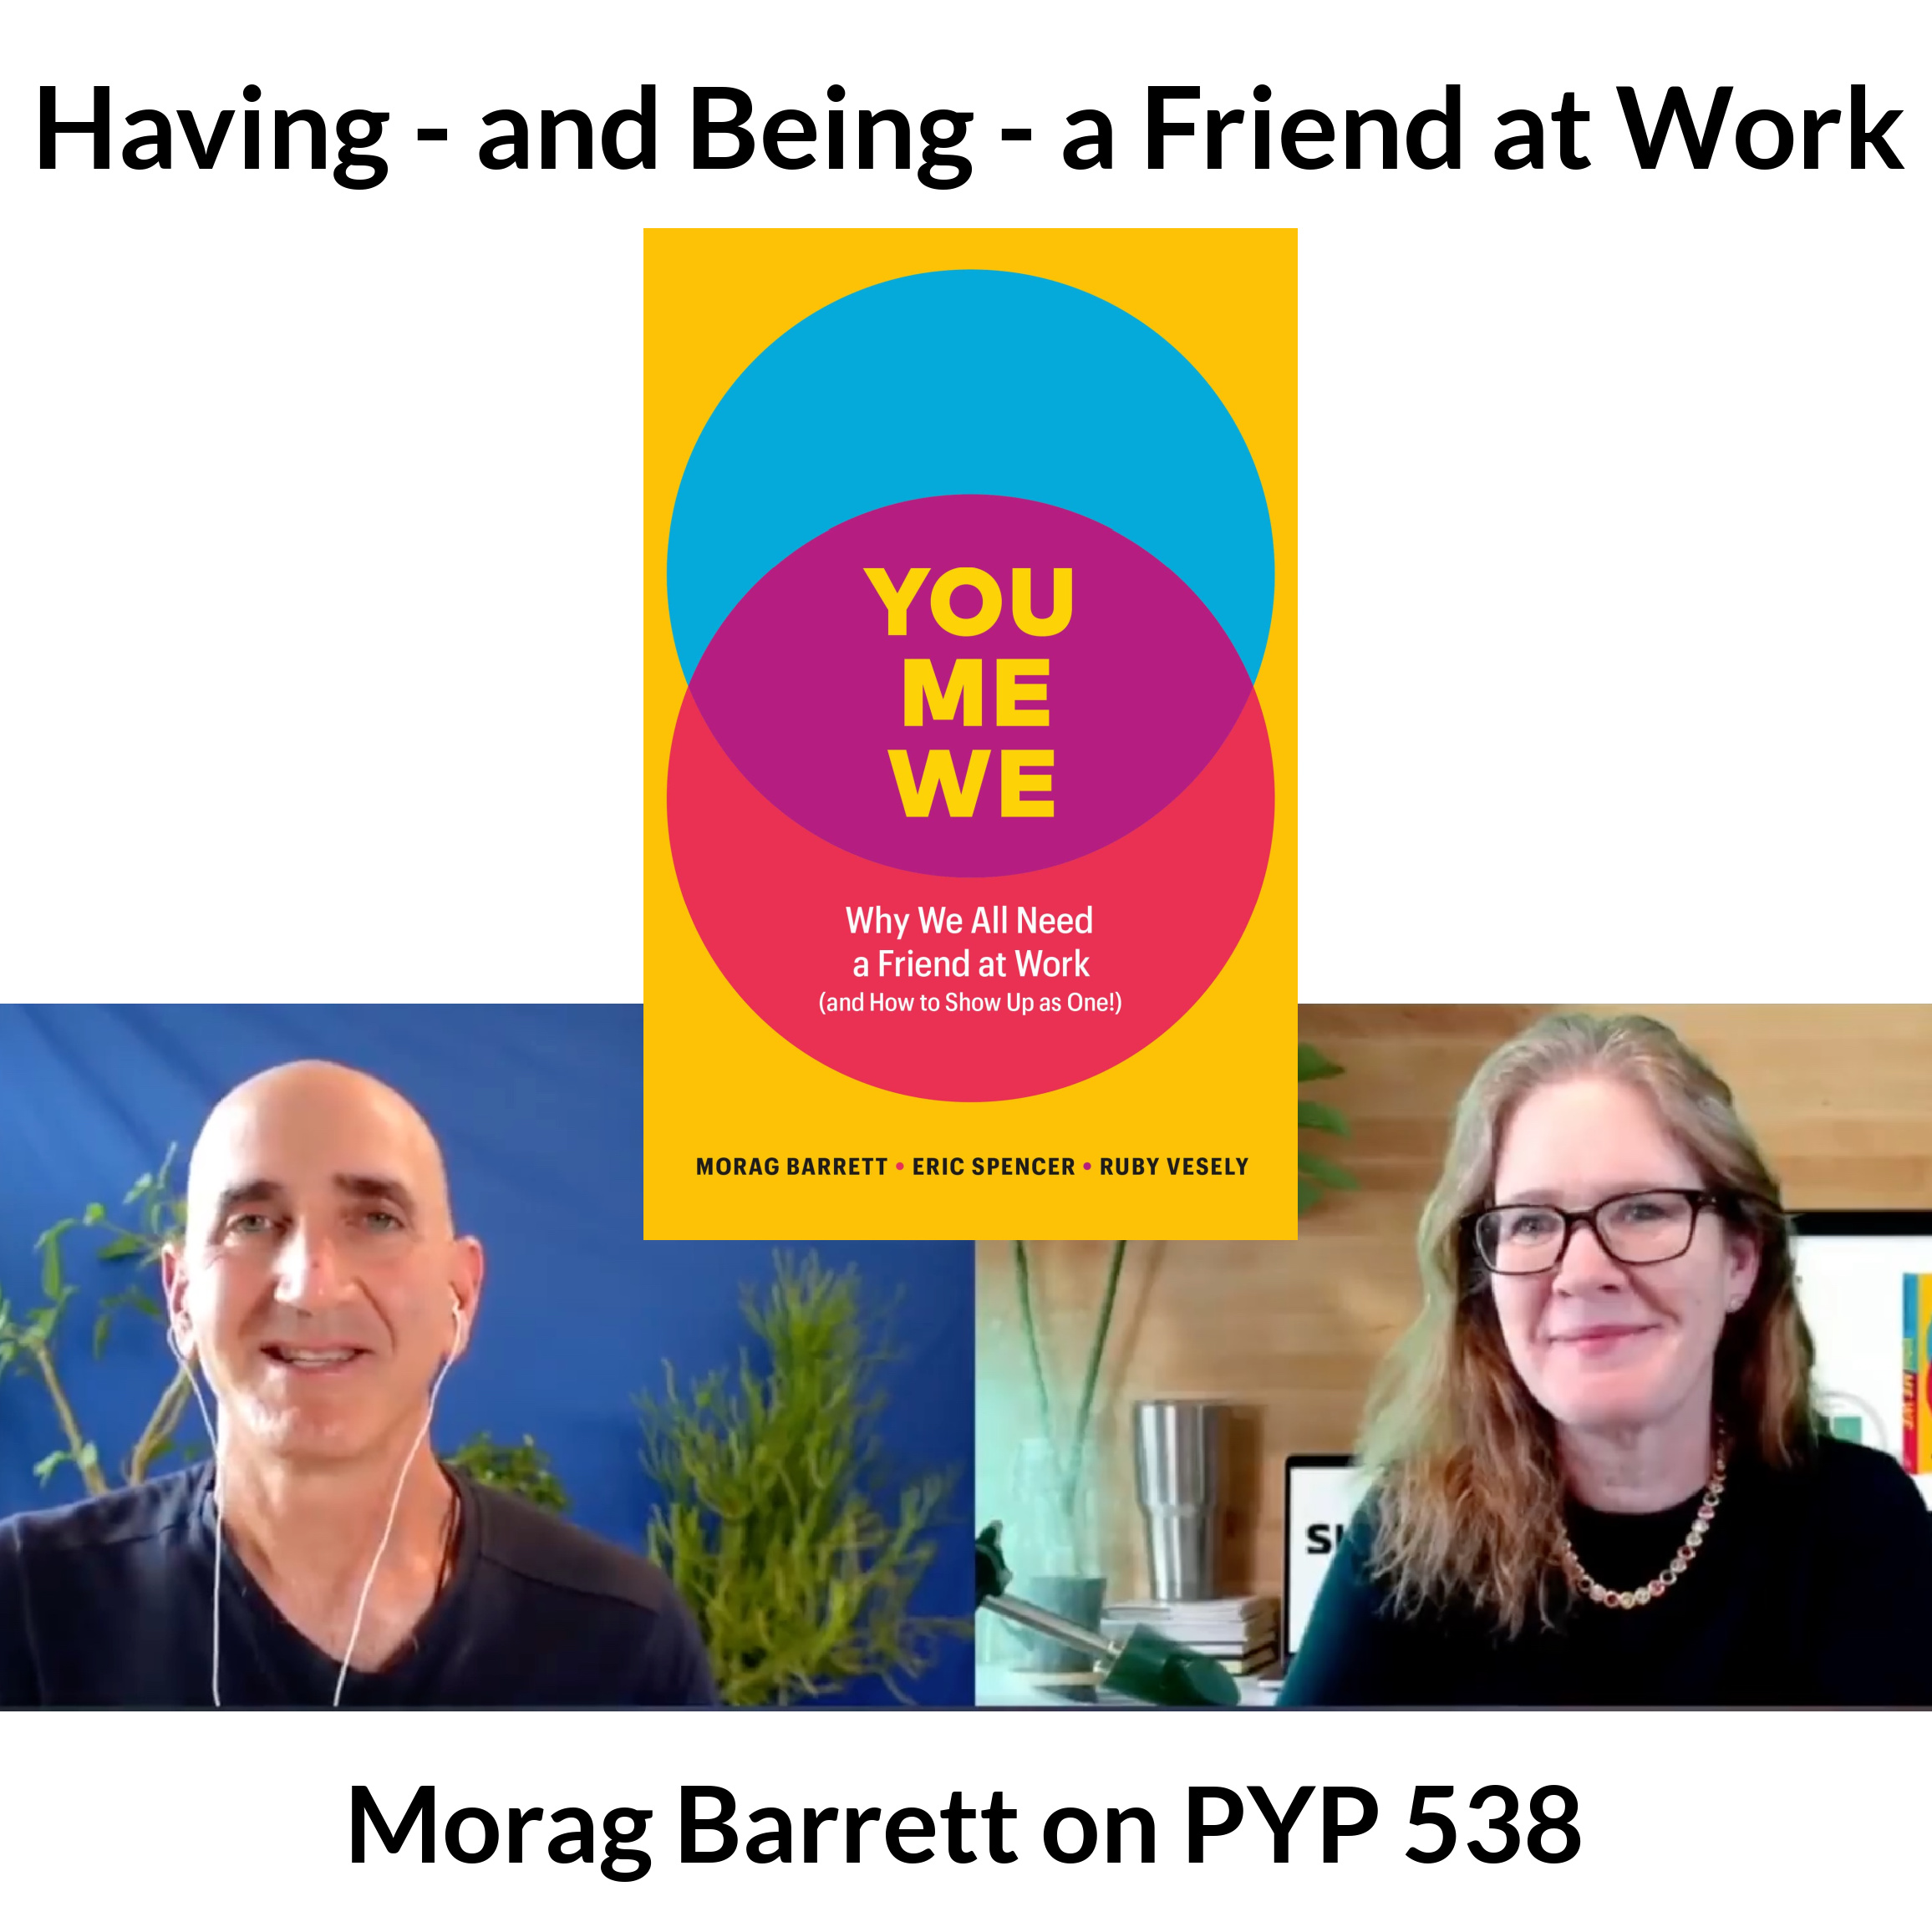 Having - and Being - a Friend at Work: Morag Barrett on PYP 538